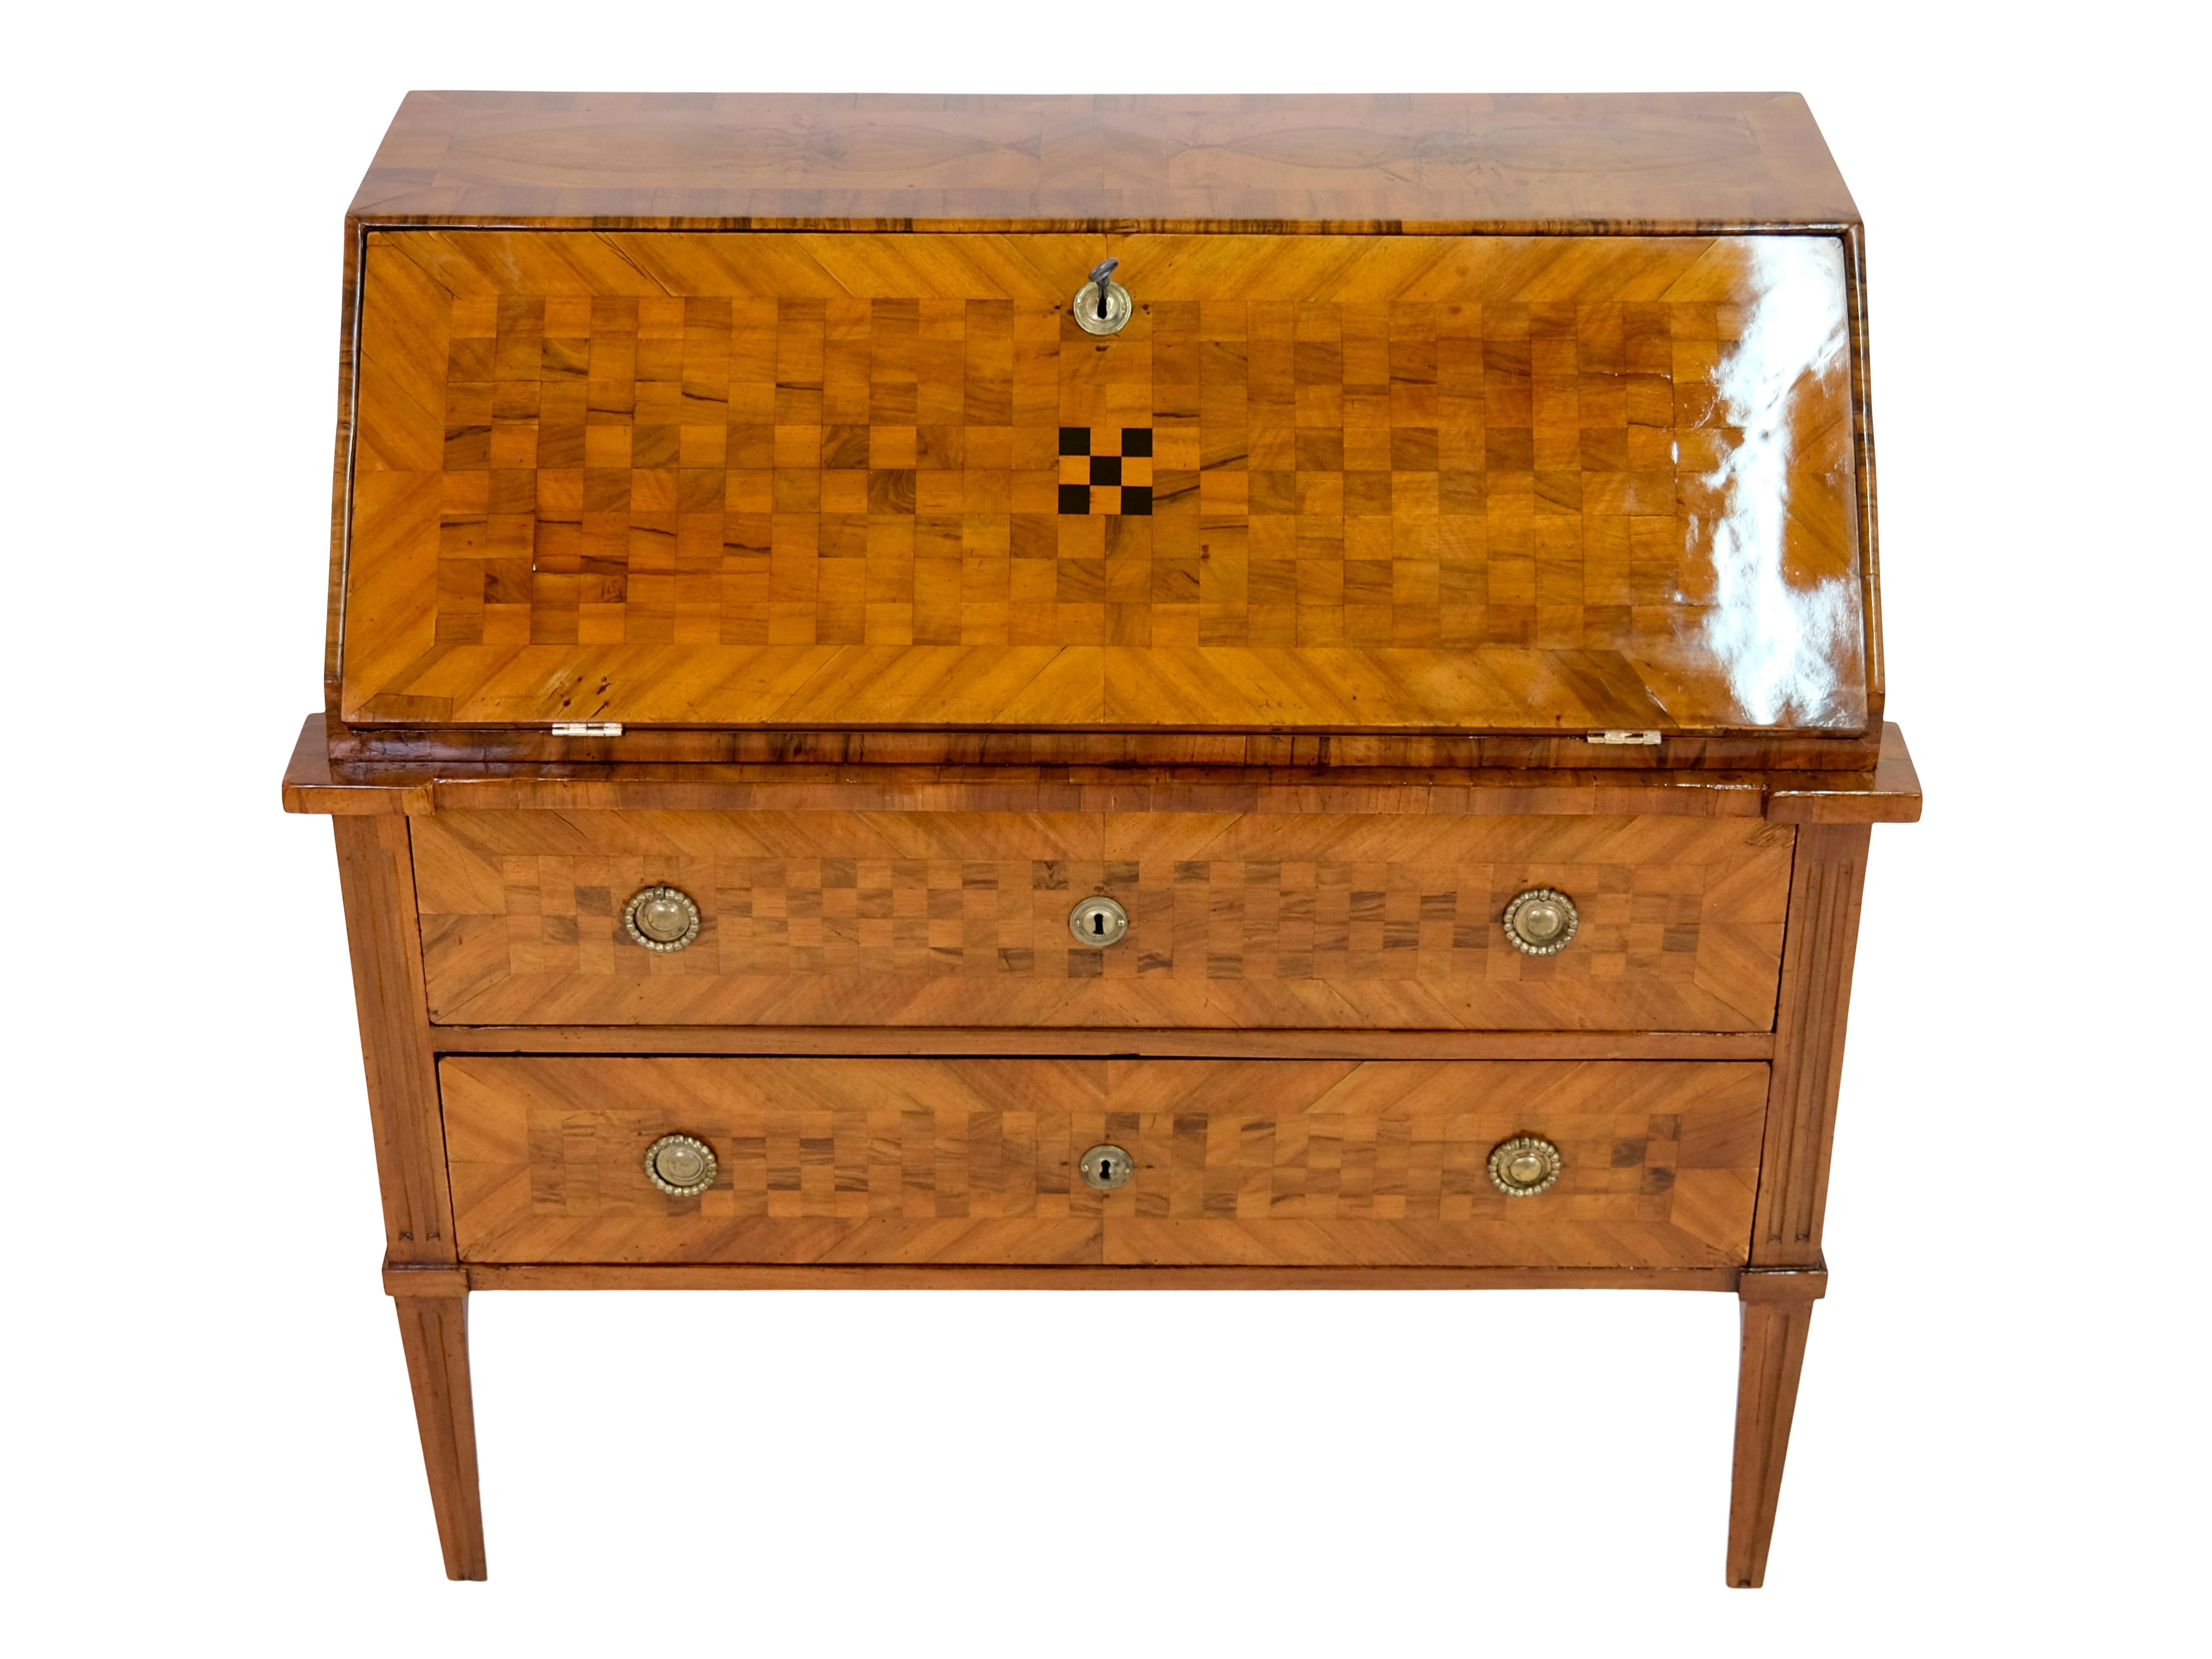 Secretary
Nutwood, shellac hand polished

Original Louis XVI (also: Louis-seize), France around 1780

Dimensions:
Width: 106 cm
Height: 106 cm
Depth: 55 cm
Working height: 75,5 cm.